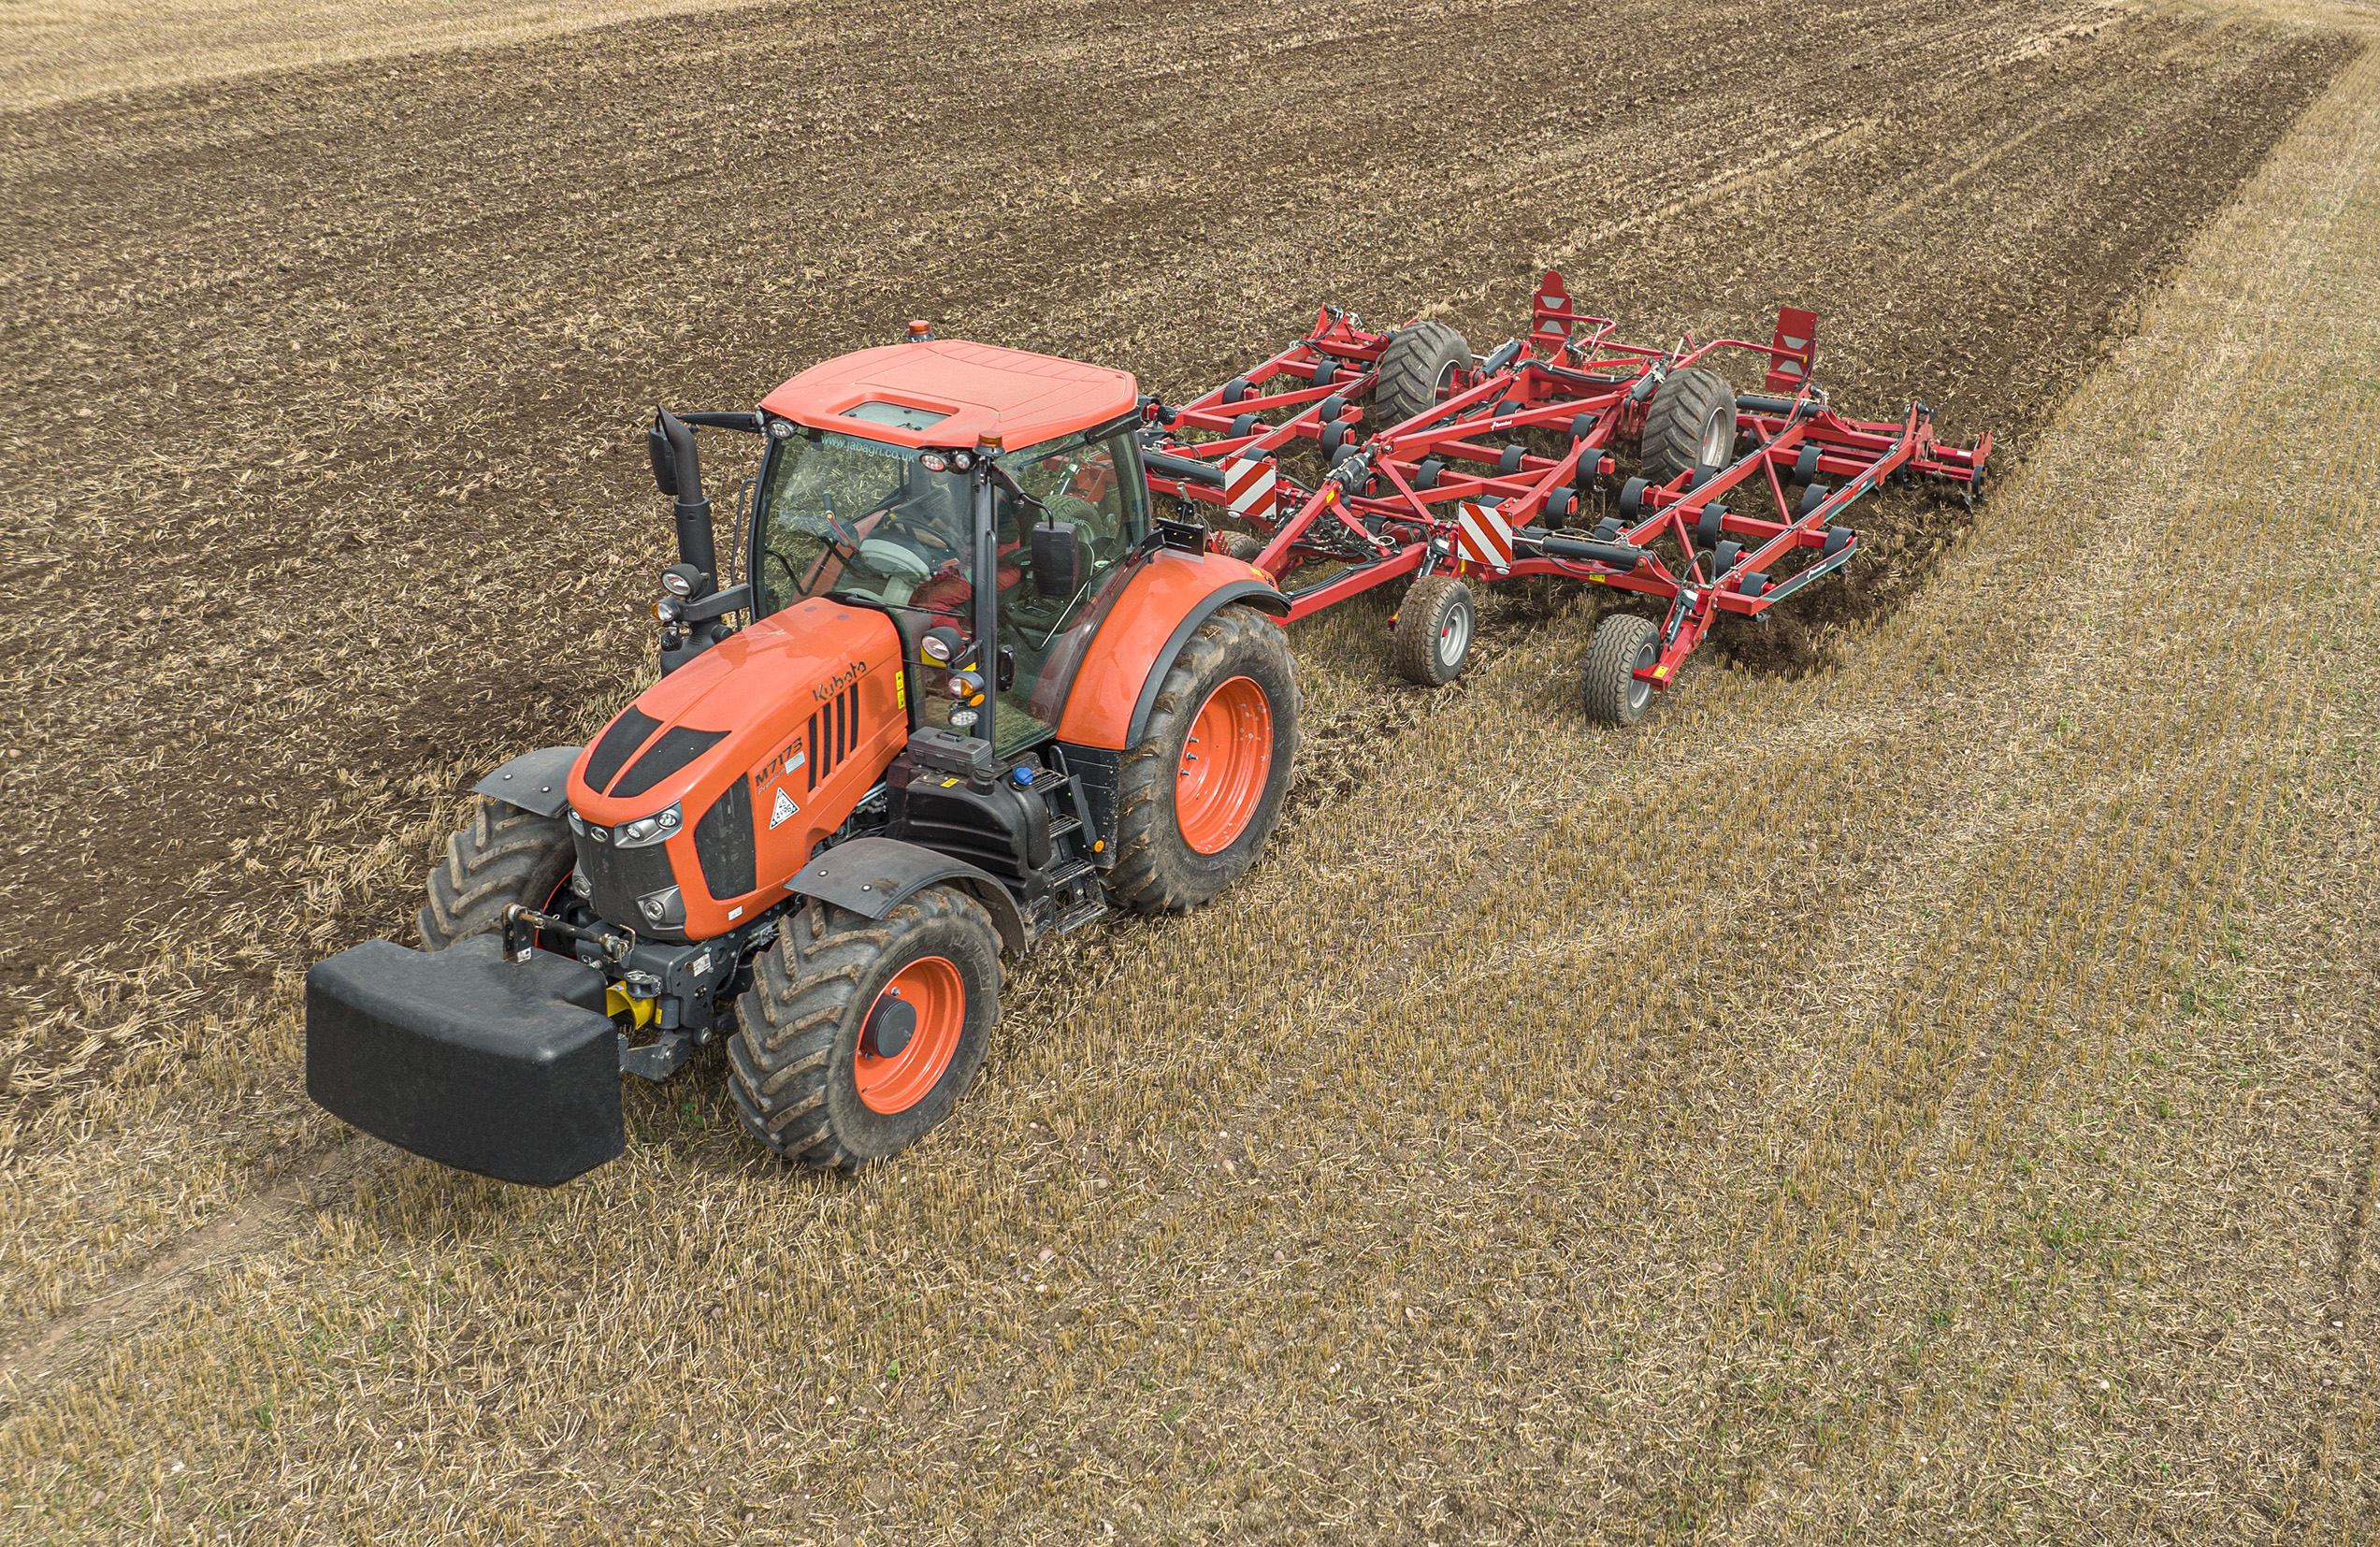 Kubota launches summer finance scheme with 0% and five-year warranty